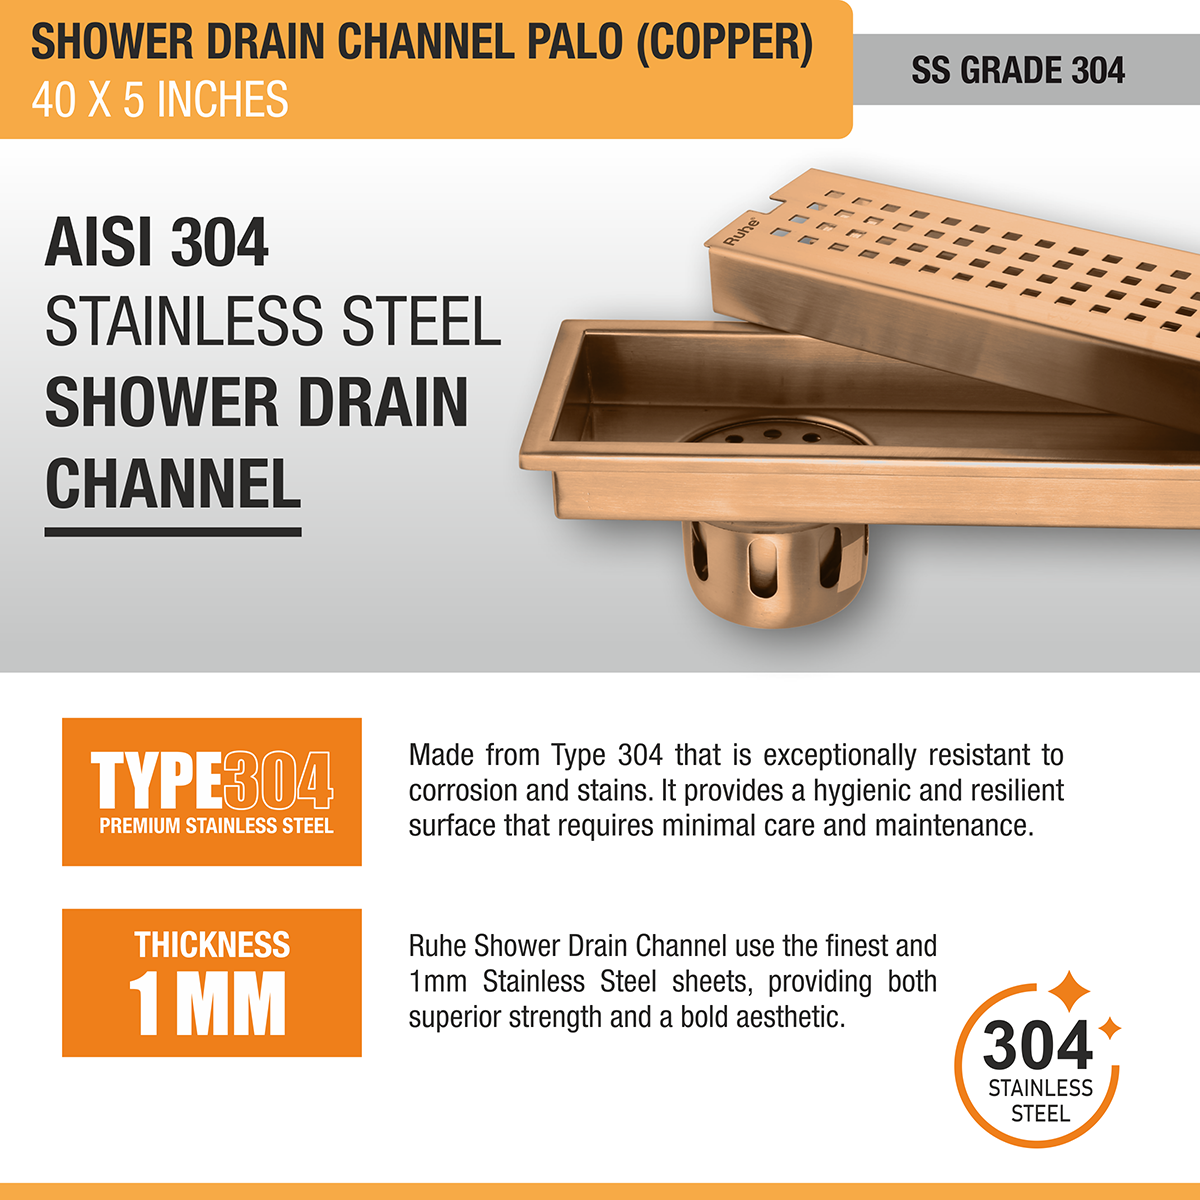 Palo Shower Drain Channel (40 x 5 Inches) ROSE GOLD/ANTIQUE COPPER stainless steel